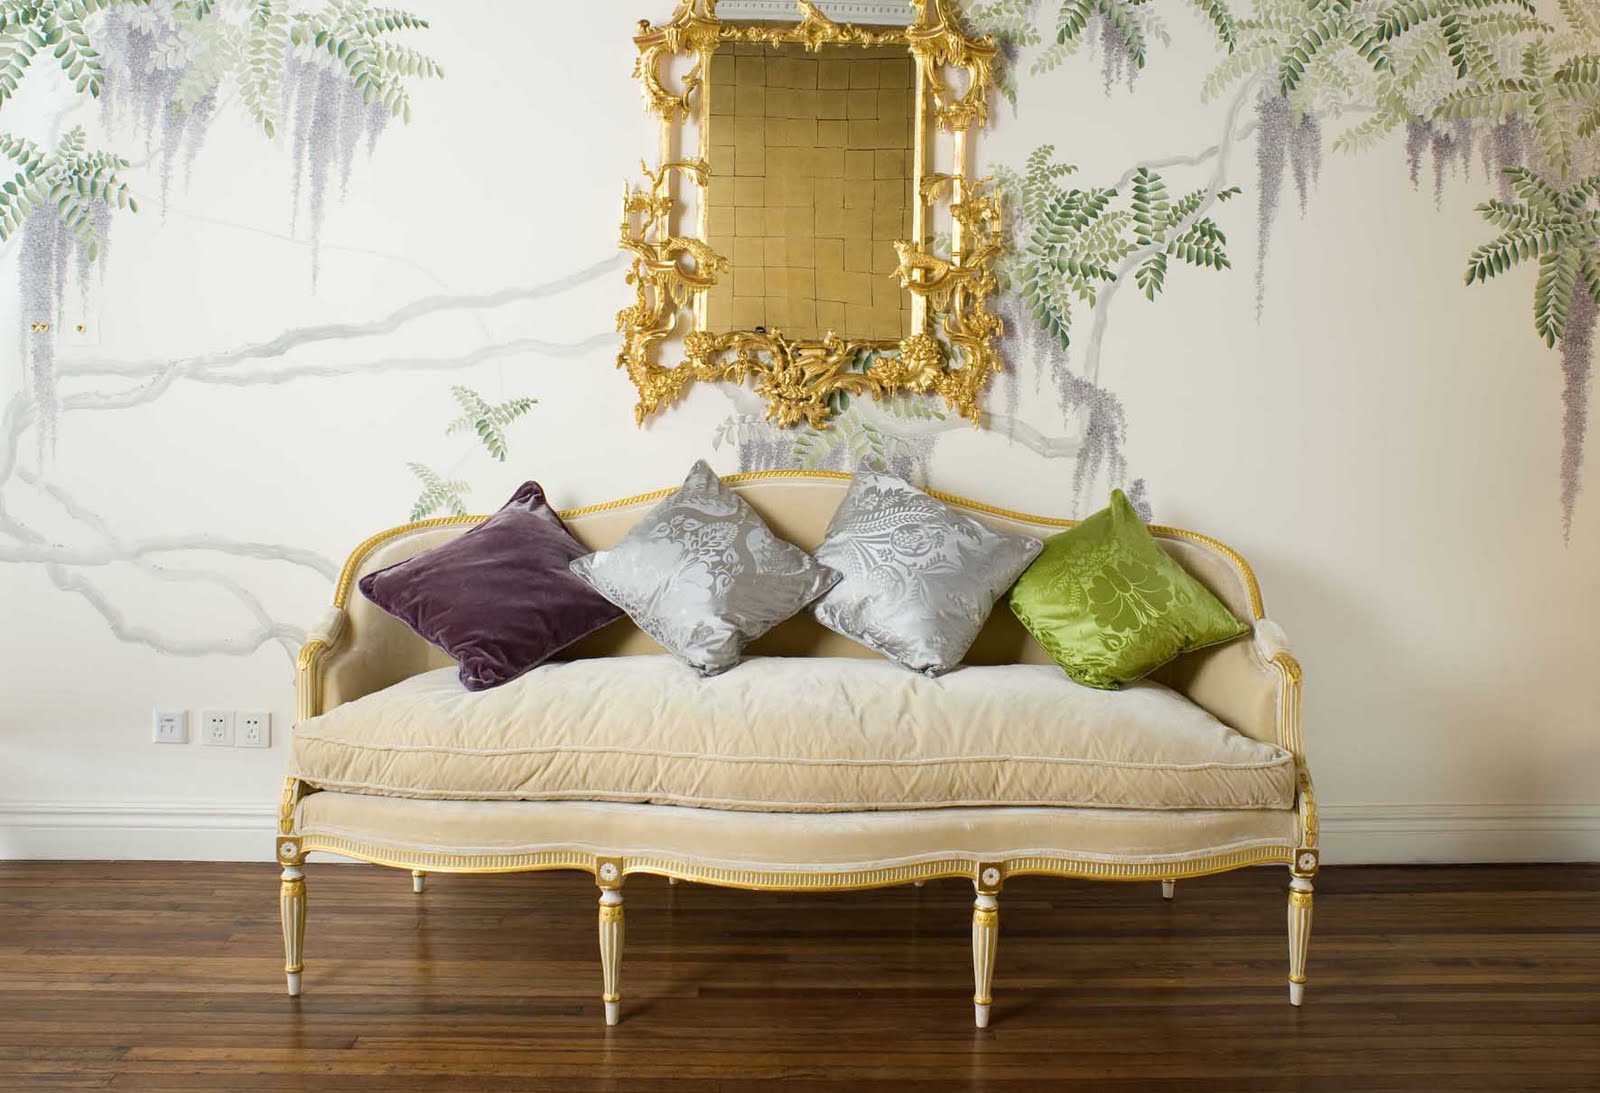 Wallpaper French Settee Pillows Gold Mirror Eclectic Home Decor Ideas